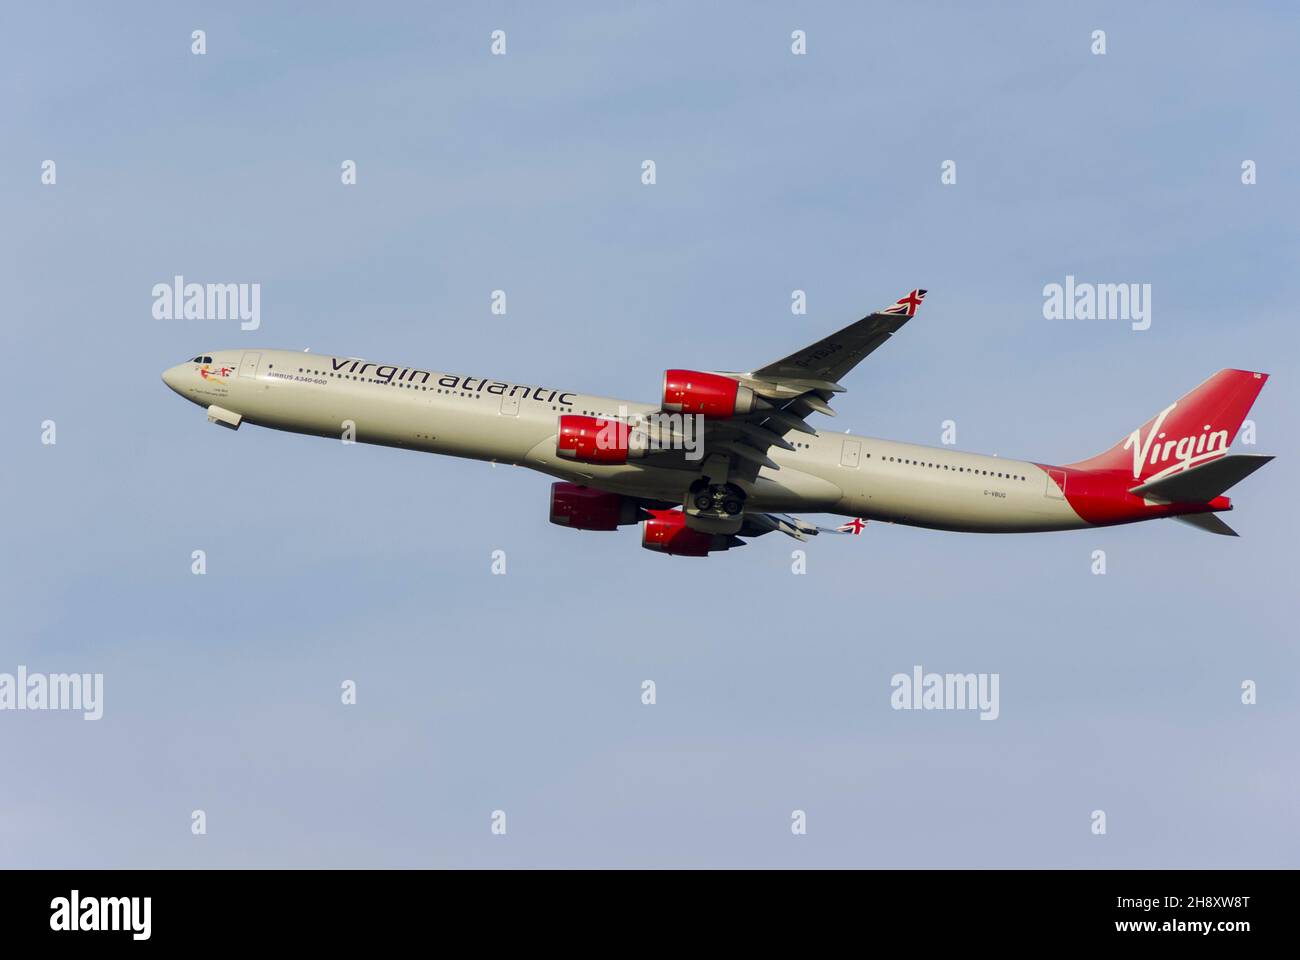 Virgin Atlantic Airbus A340 airliner jet plane climbing out after taking off from London Heathrow Airport, UK, into blue sky for long haul flight Stock Photo